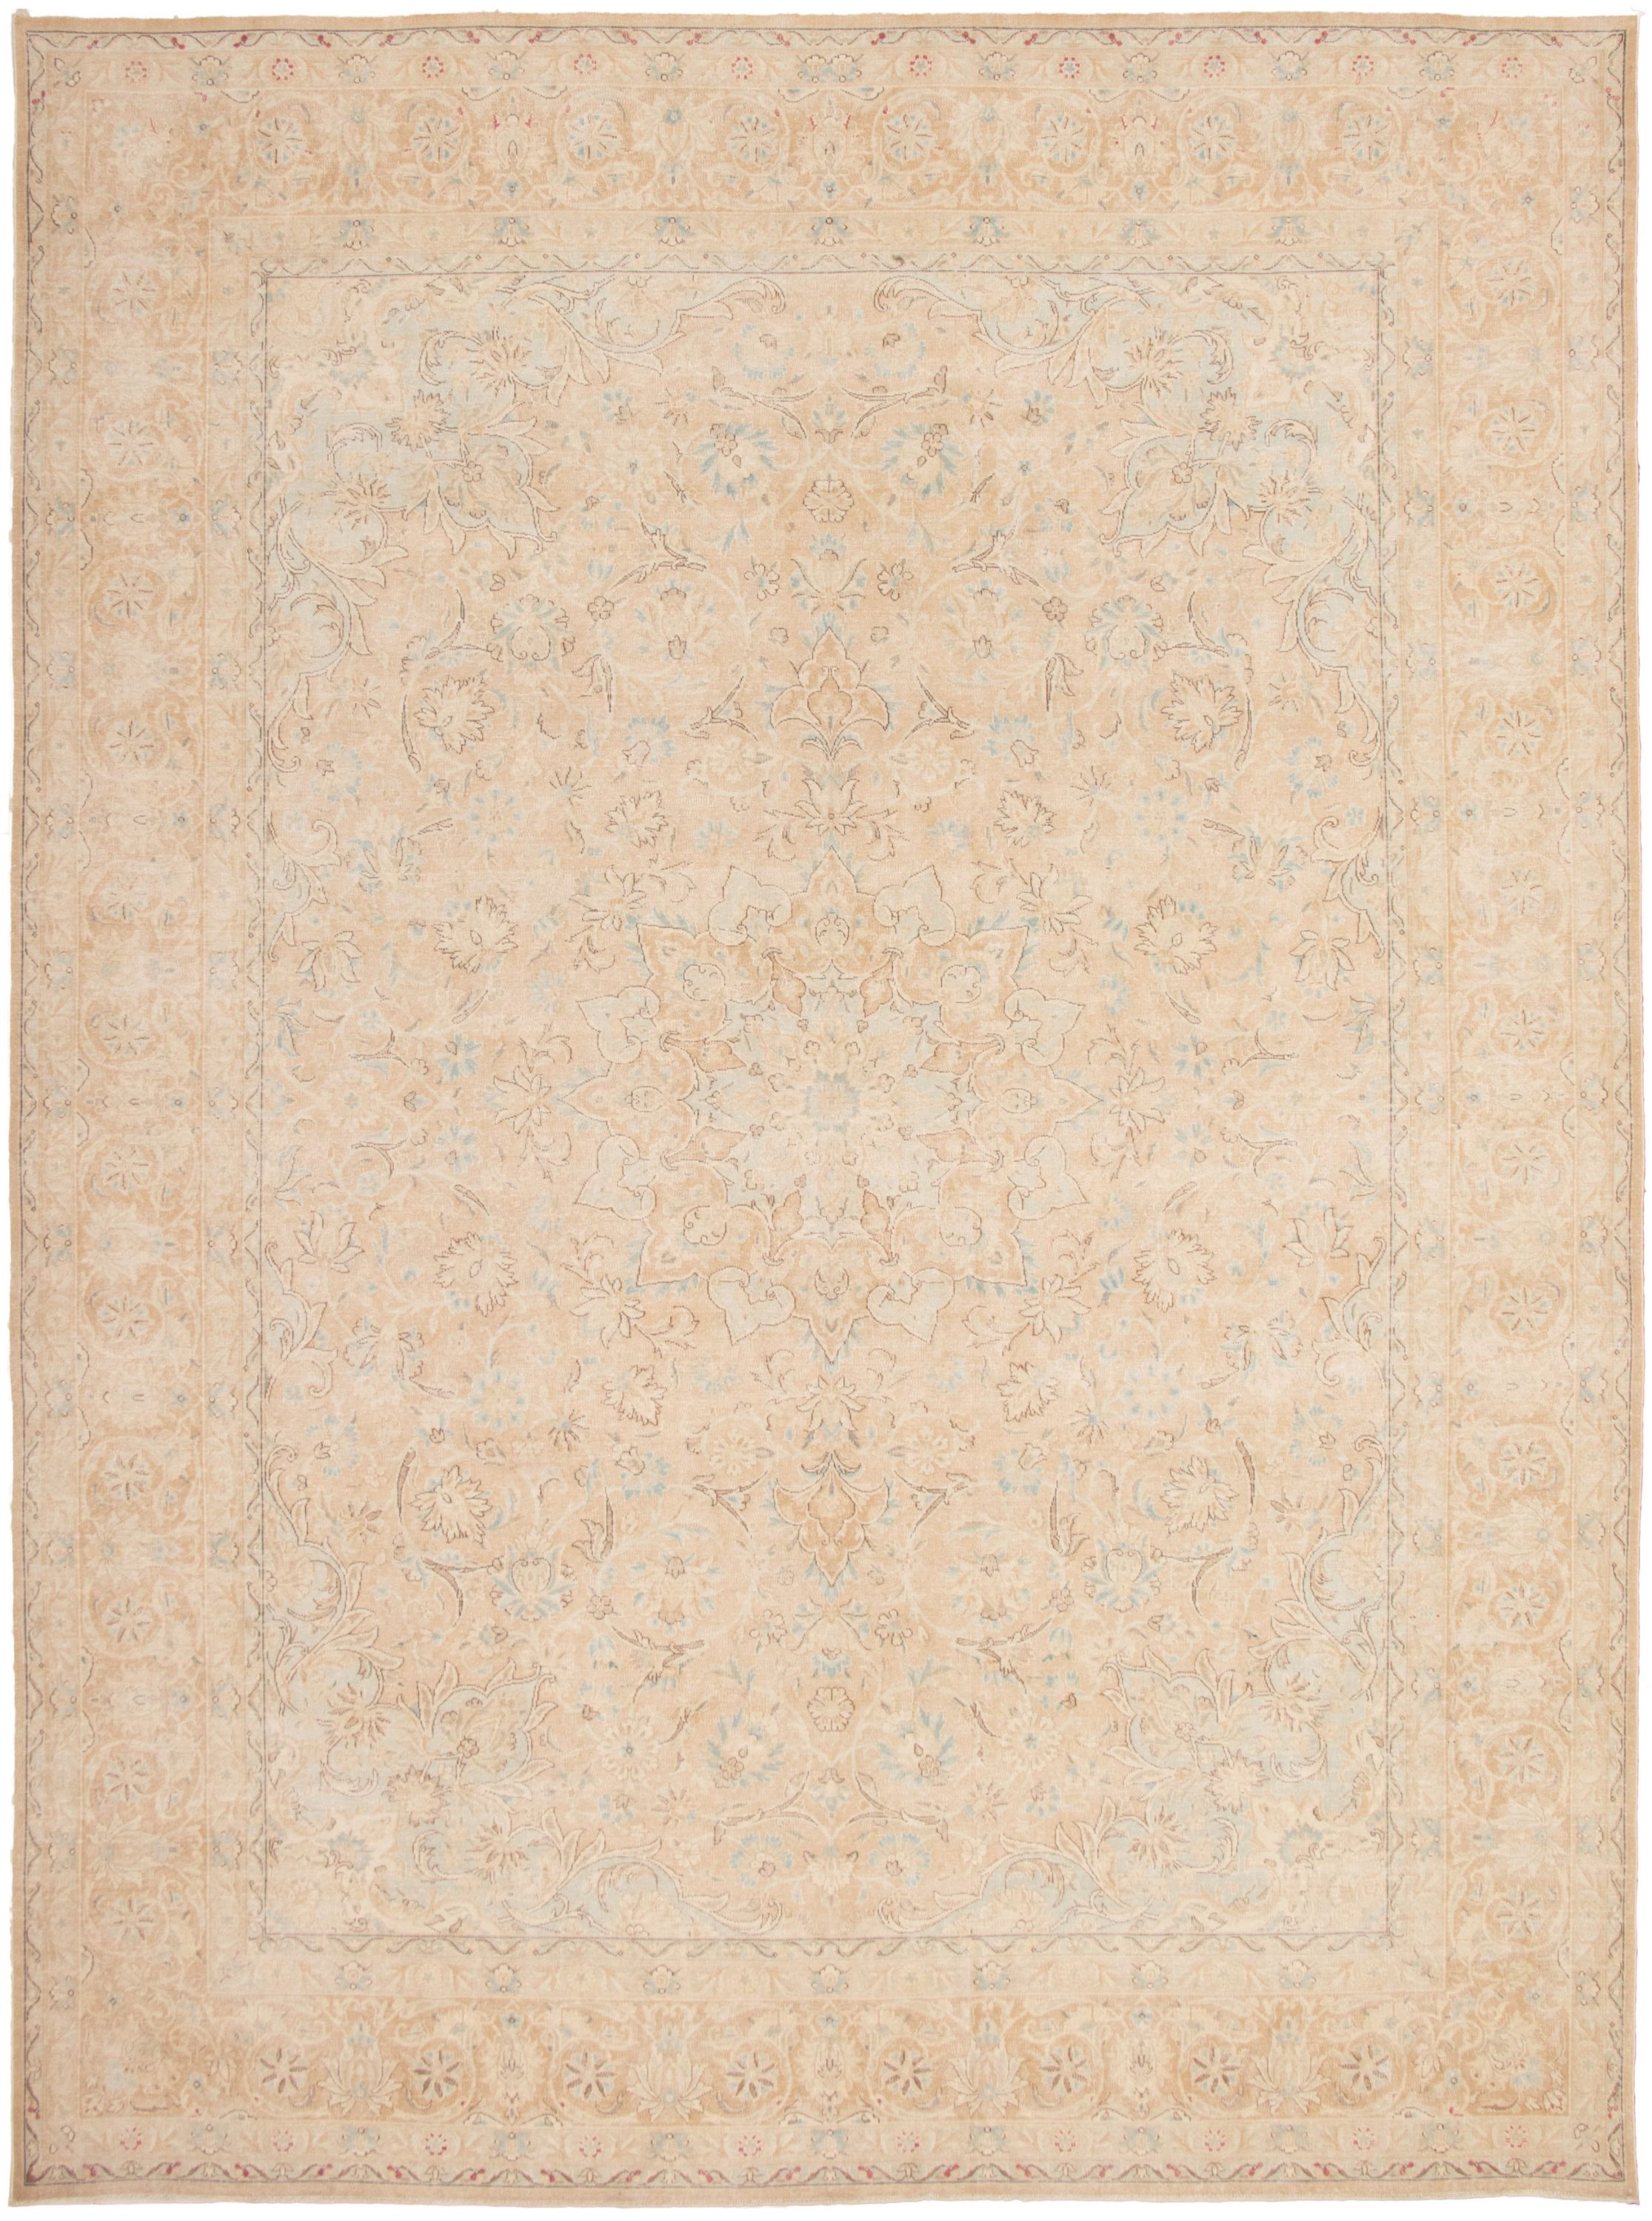 Hand-knotted Pako Vintage Tan  Rug 9'6" x 12'10" Size: 9'6" x 12'10"  